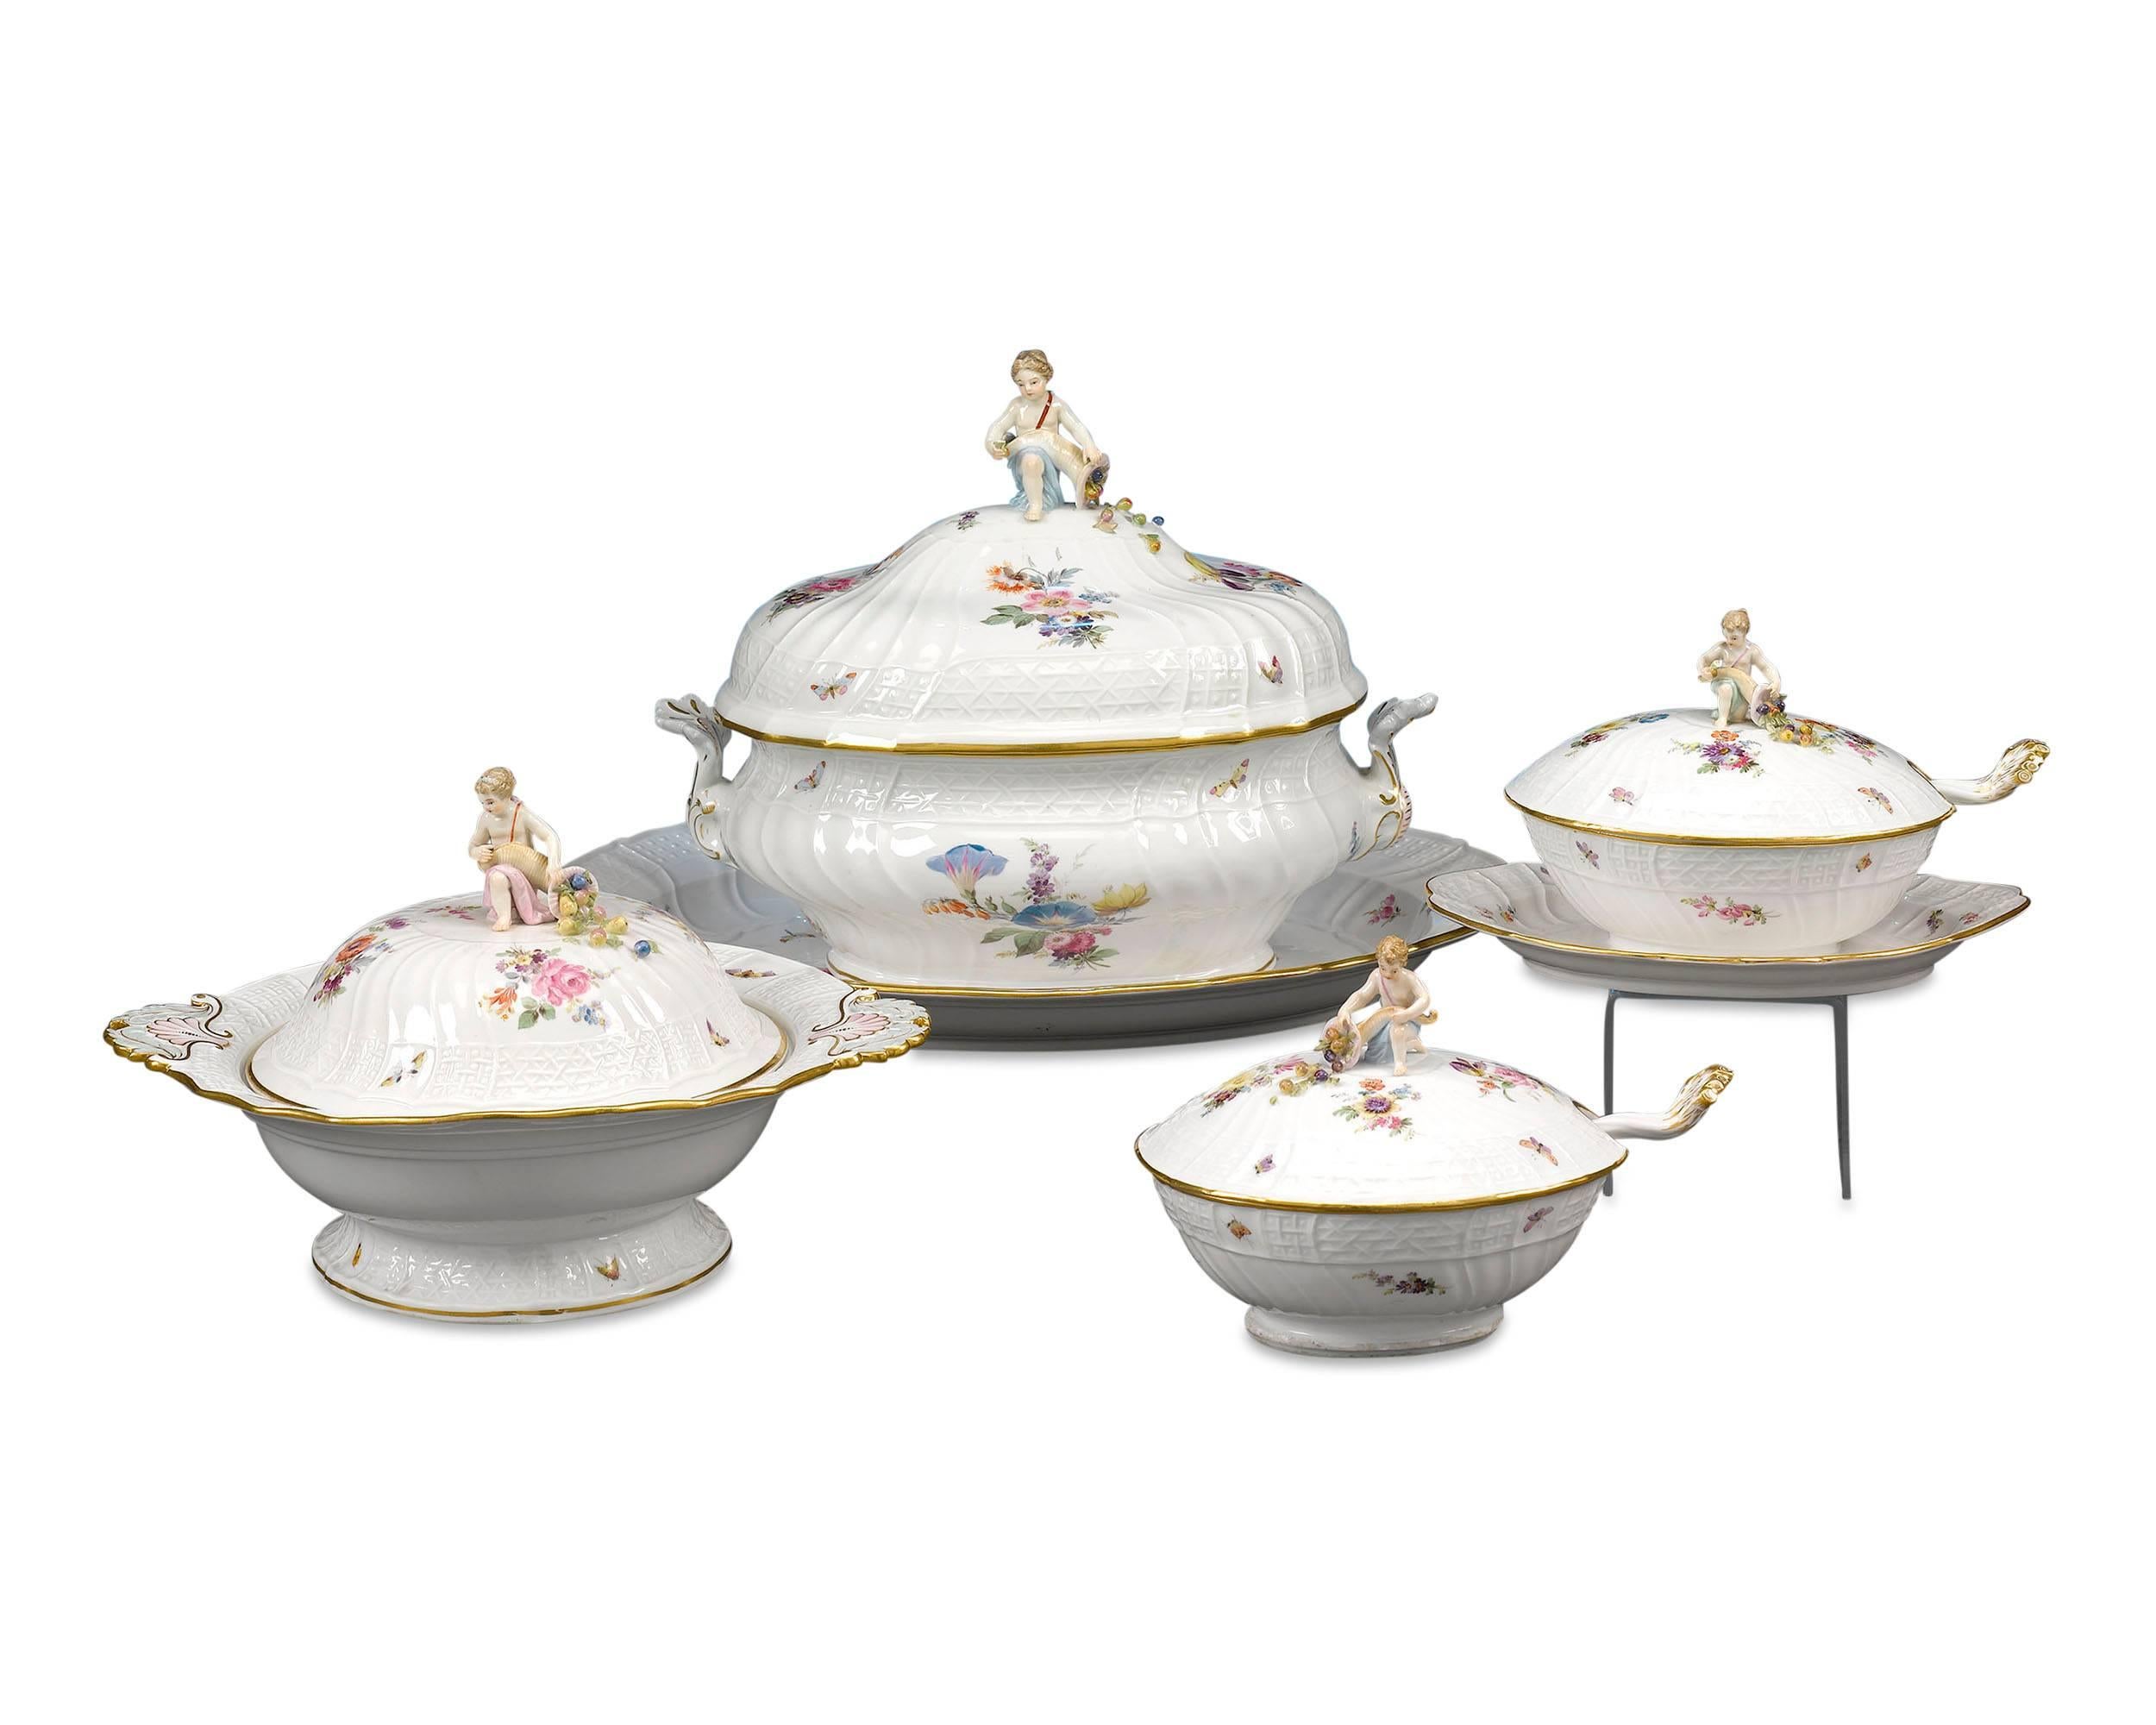 This resplendent 92-piece Meissen Porcelain dinner service for twelve is an exceptional example of the firm's domestic ware. The bodies are crafted in the New Brandenstein relief pattern designed by Johann Friedrich Eberlein in 1744, which gives